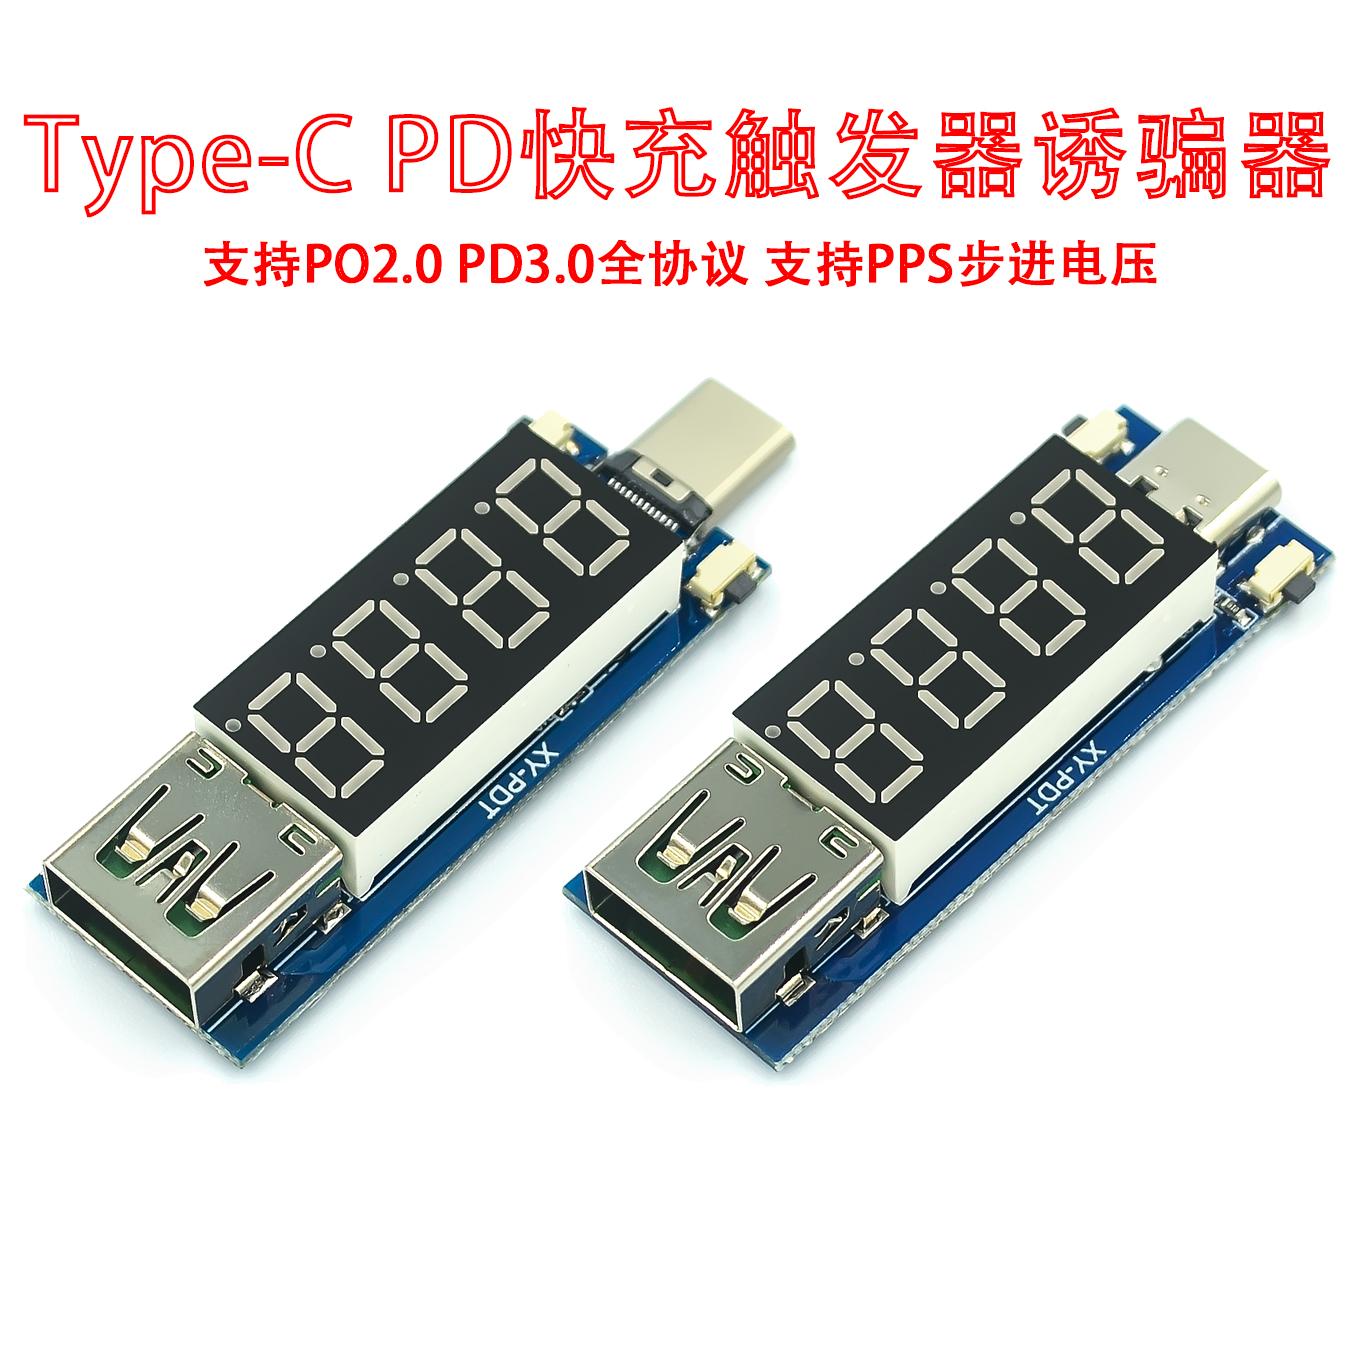 Type-C PD decoy module Quick charge trigger module DC digital display voltage ampere meter Test instrument Support PD2.0 PD3.0